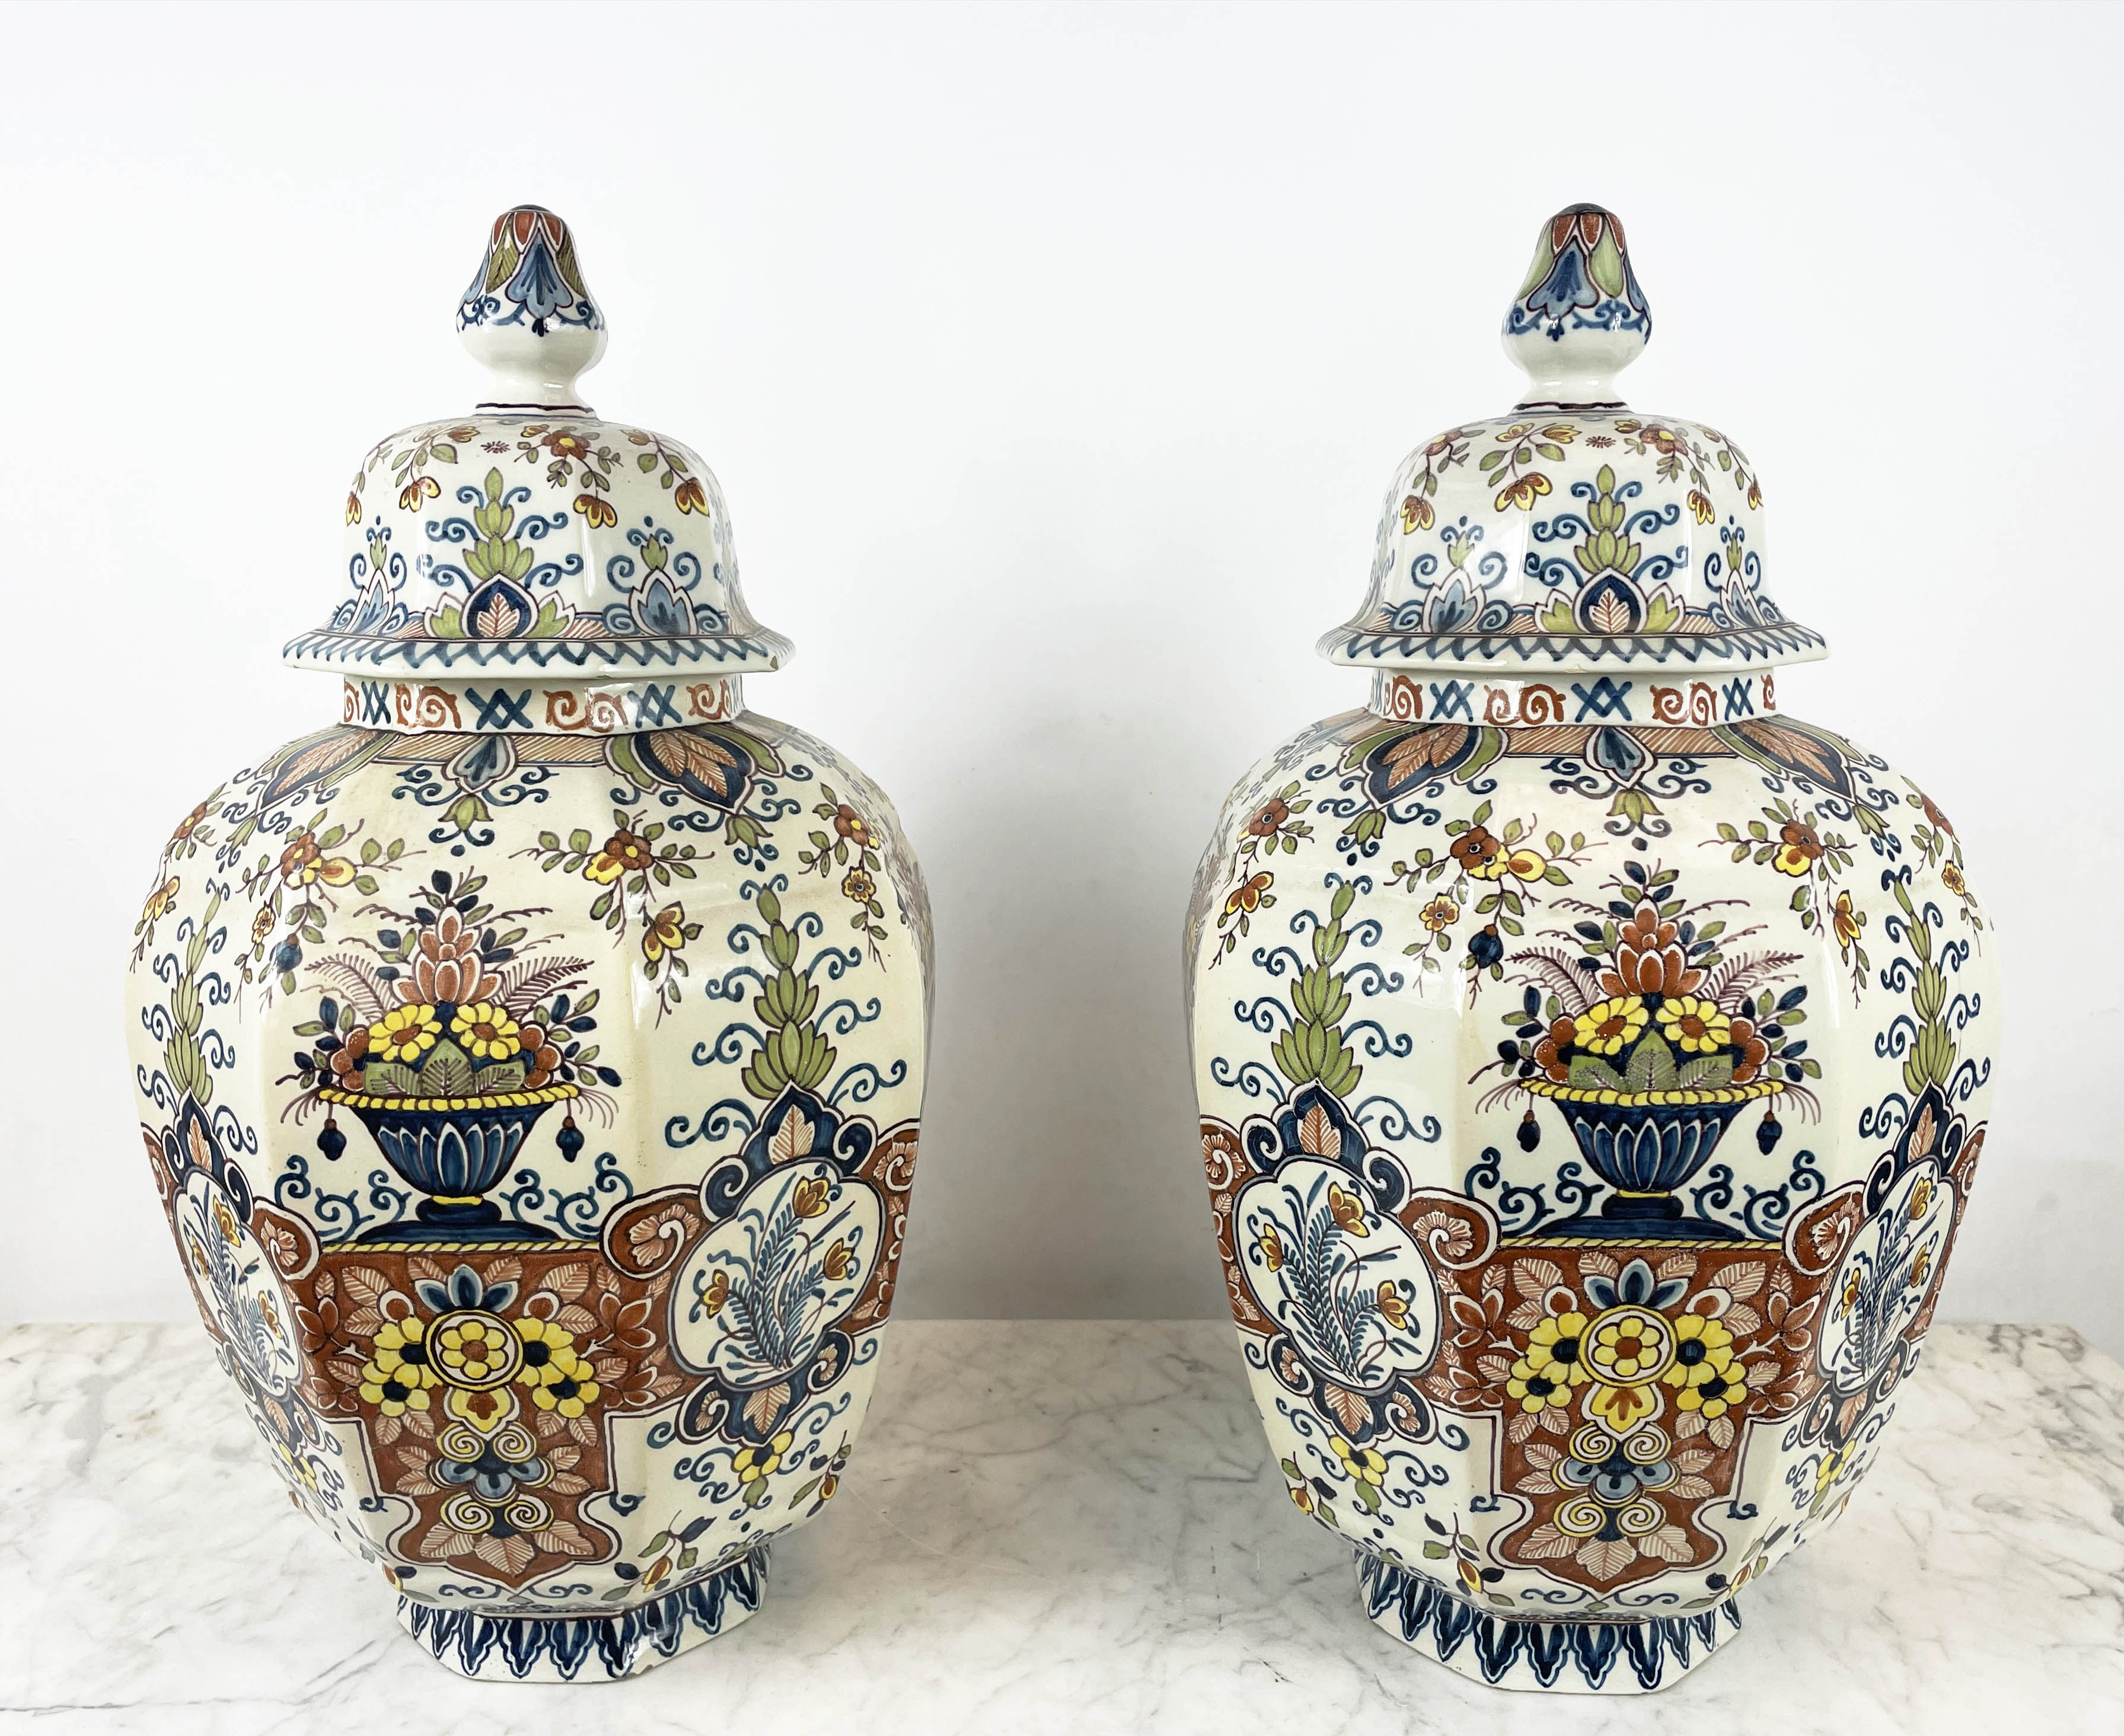 LIDDED DELFT VASES, a pair, 19th century polychrome painted, faceted octagonal form, with foliate